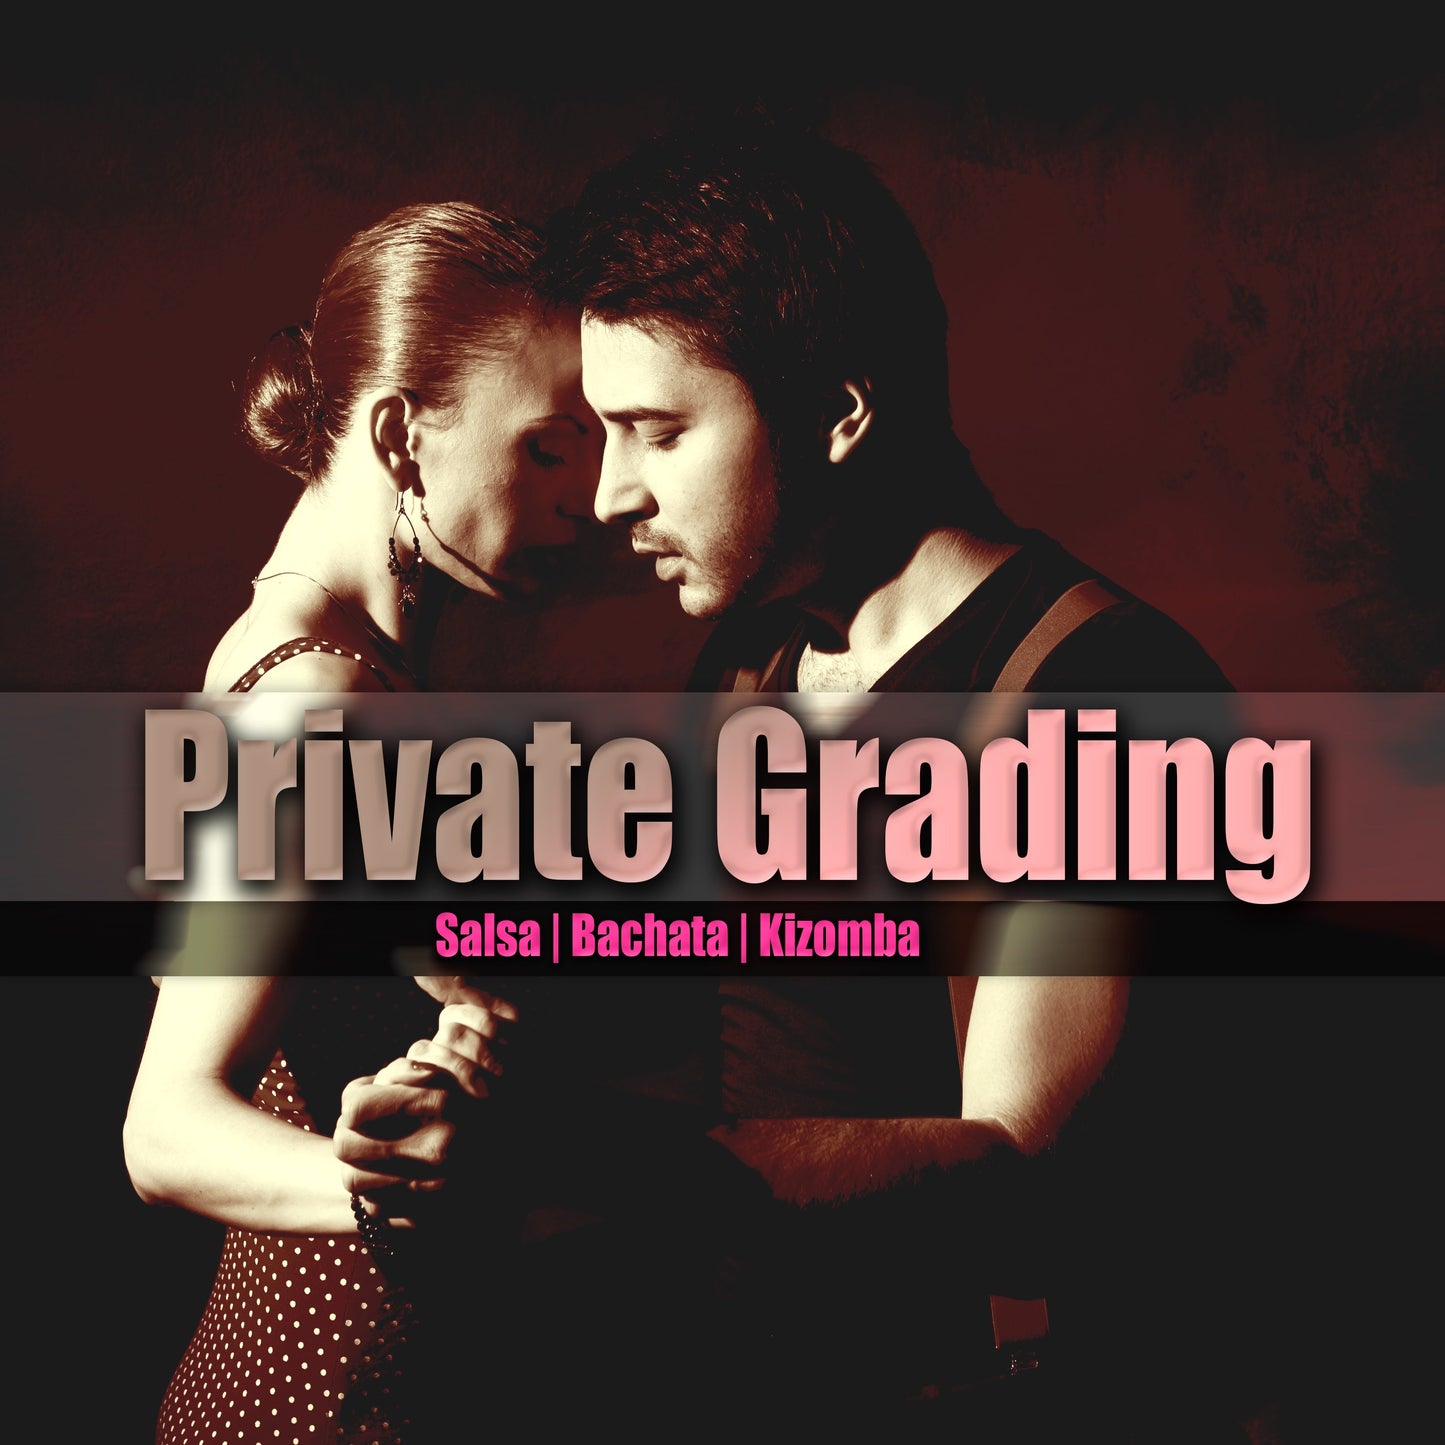 Private Imp-Int Grading #2 Director (30mins)